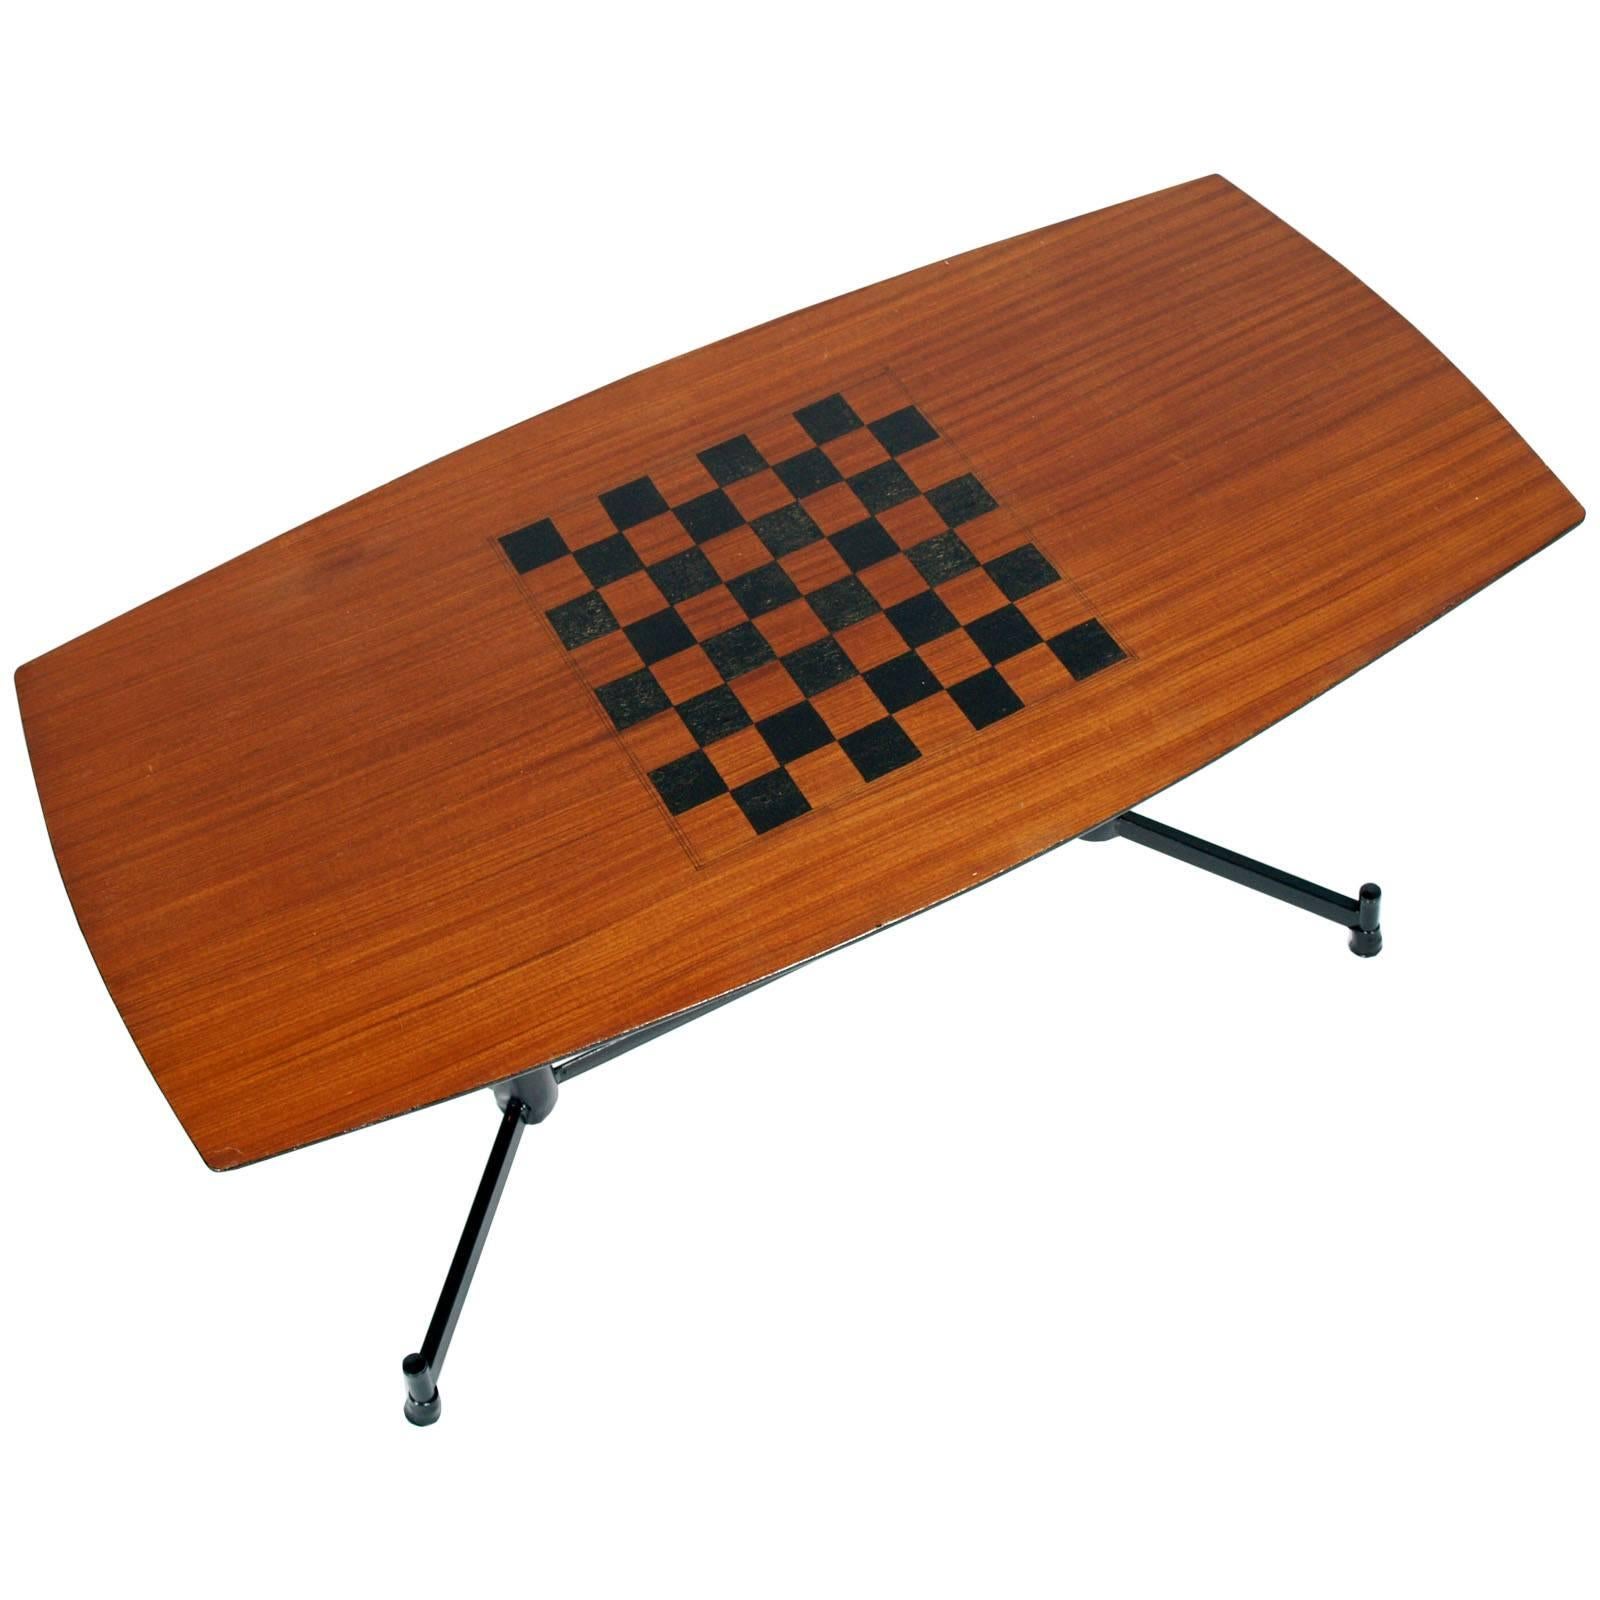 Mid-Century Modern gambling table attributed to Osvaldo Borsani for Tecno, veneered mahogany decorated for game chess. Legs in painted steel with adjustable feet. Good conditions.

Measures cm: H 40, W 78, D 40.